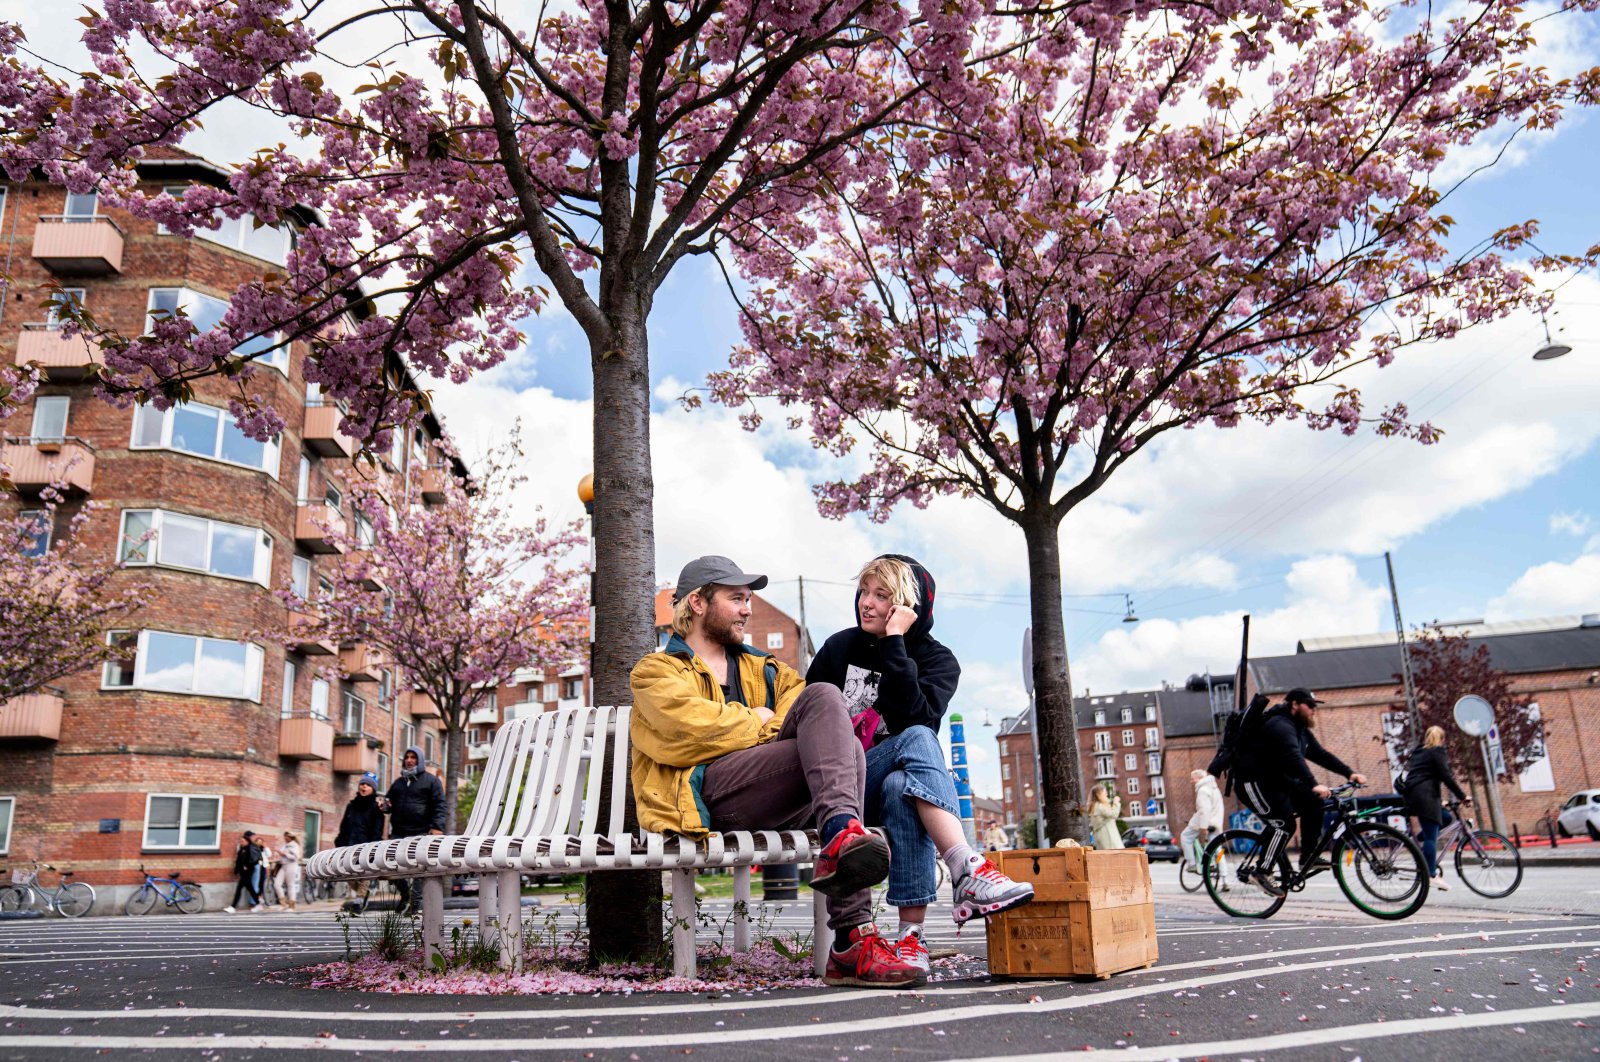 A man and woman sit on a bench under Japanese cherry trees in full bloom, Copenhagen, Denmark, May 3, 2020. (AFP Photo)